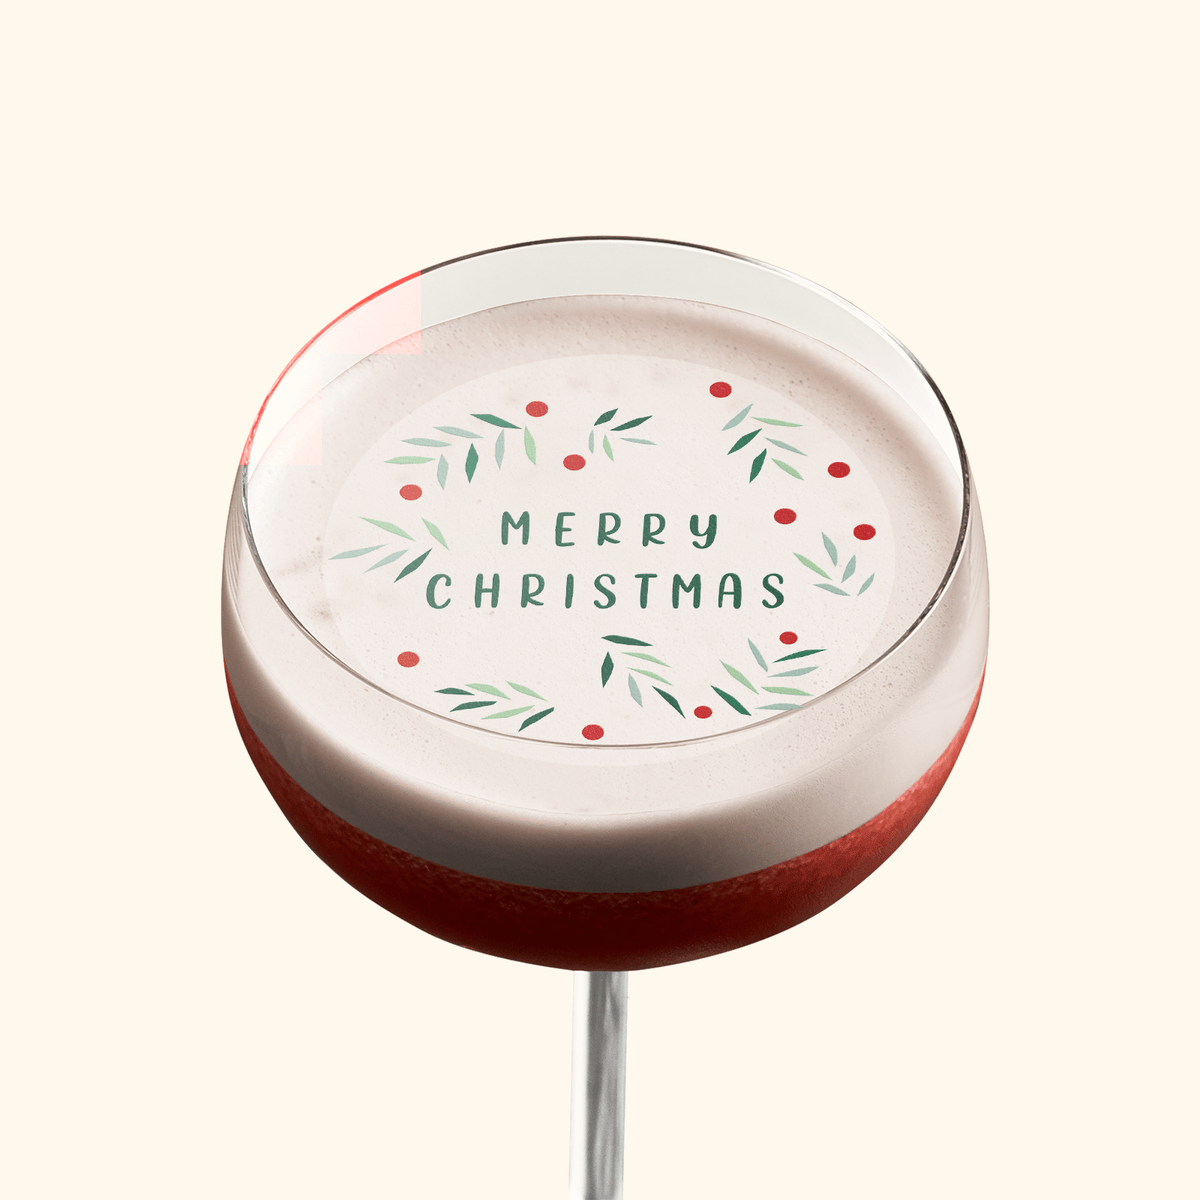 https://cdn.shopify.com/s/files/1/0564/1758/3155/products/xmas-merry-christmas-cocktail-topper-edible-cocktail-toppers-29599600181299_1200x.png?v=1678358164